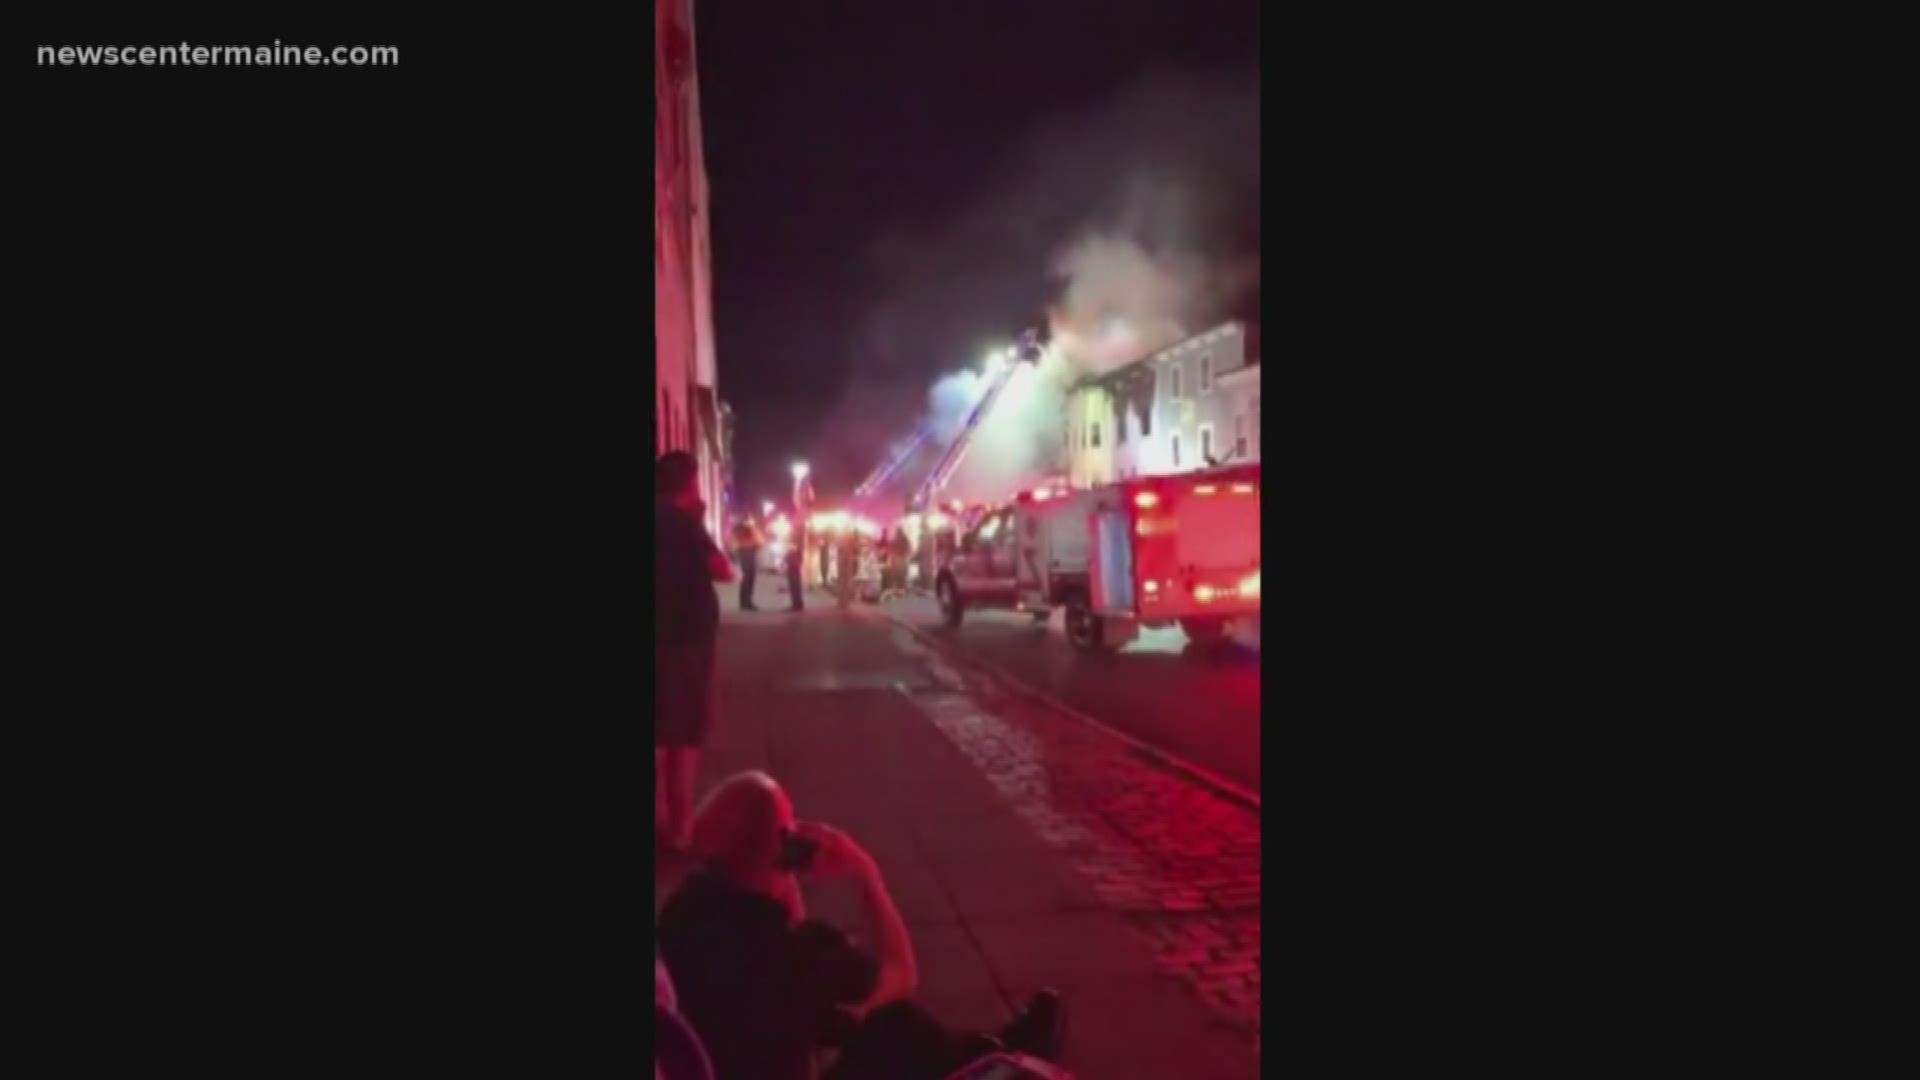 No injuries reported in large structure fire in Old Town Saturday night, according to the City of Old Town.